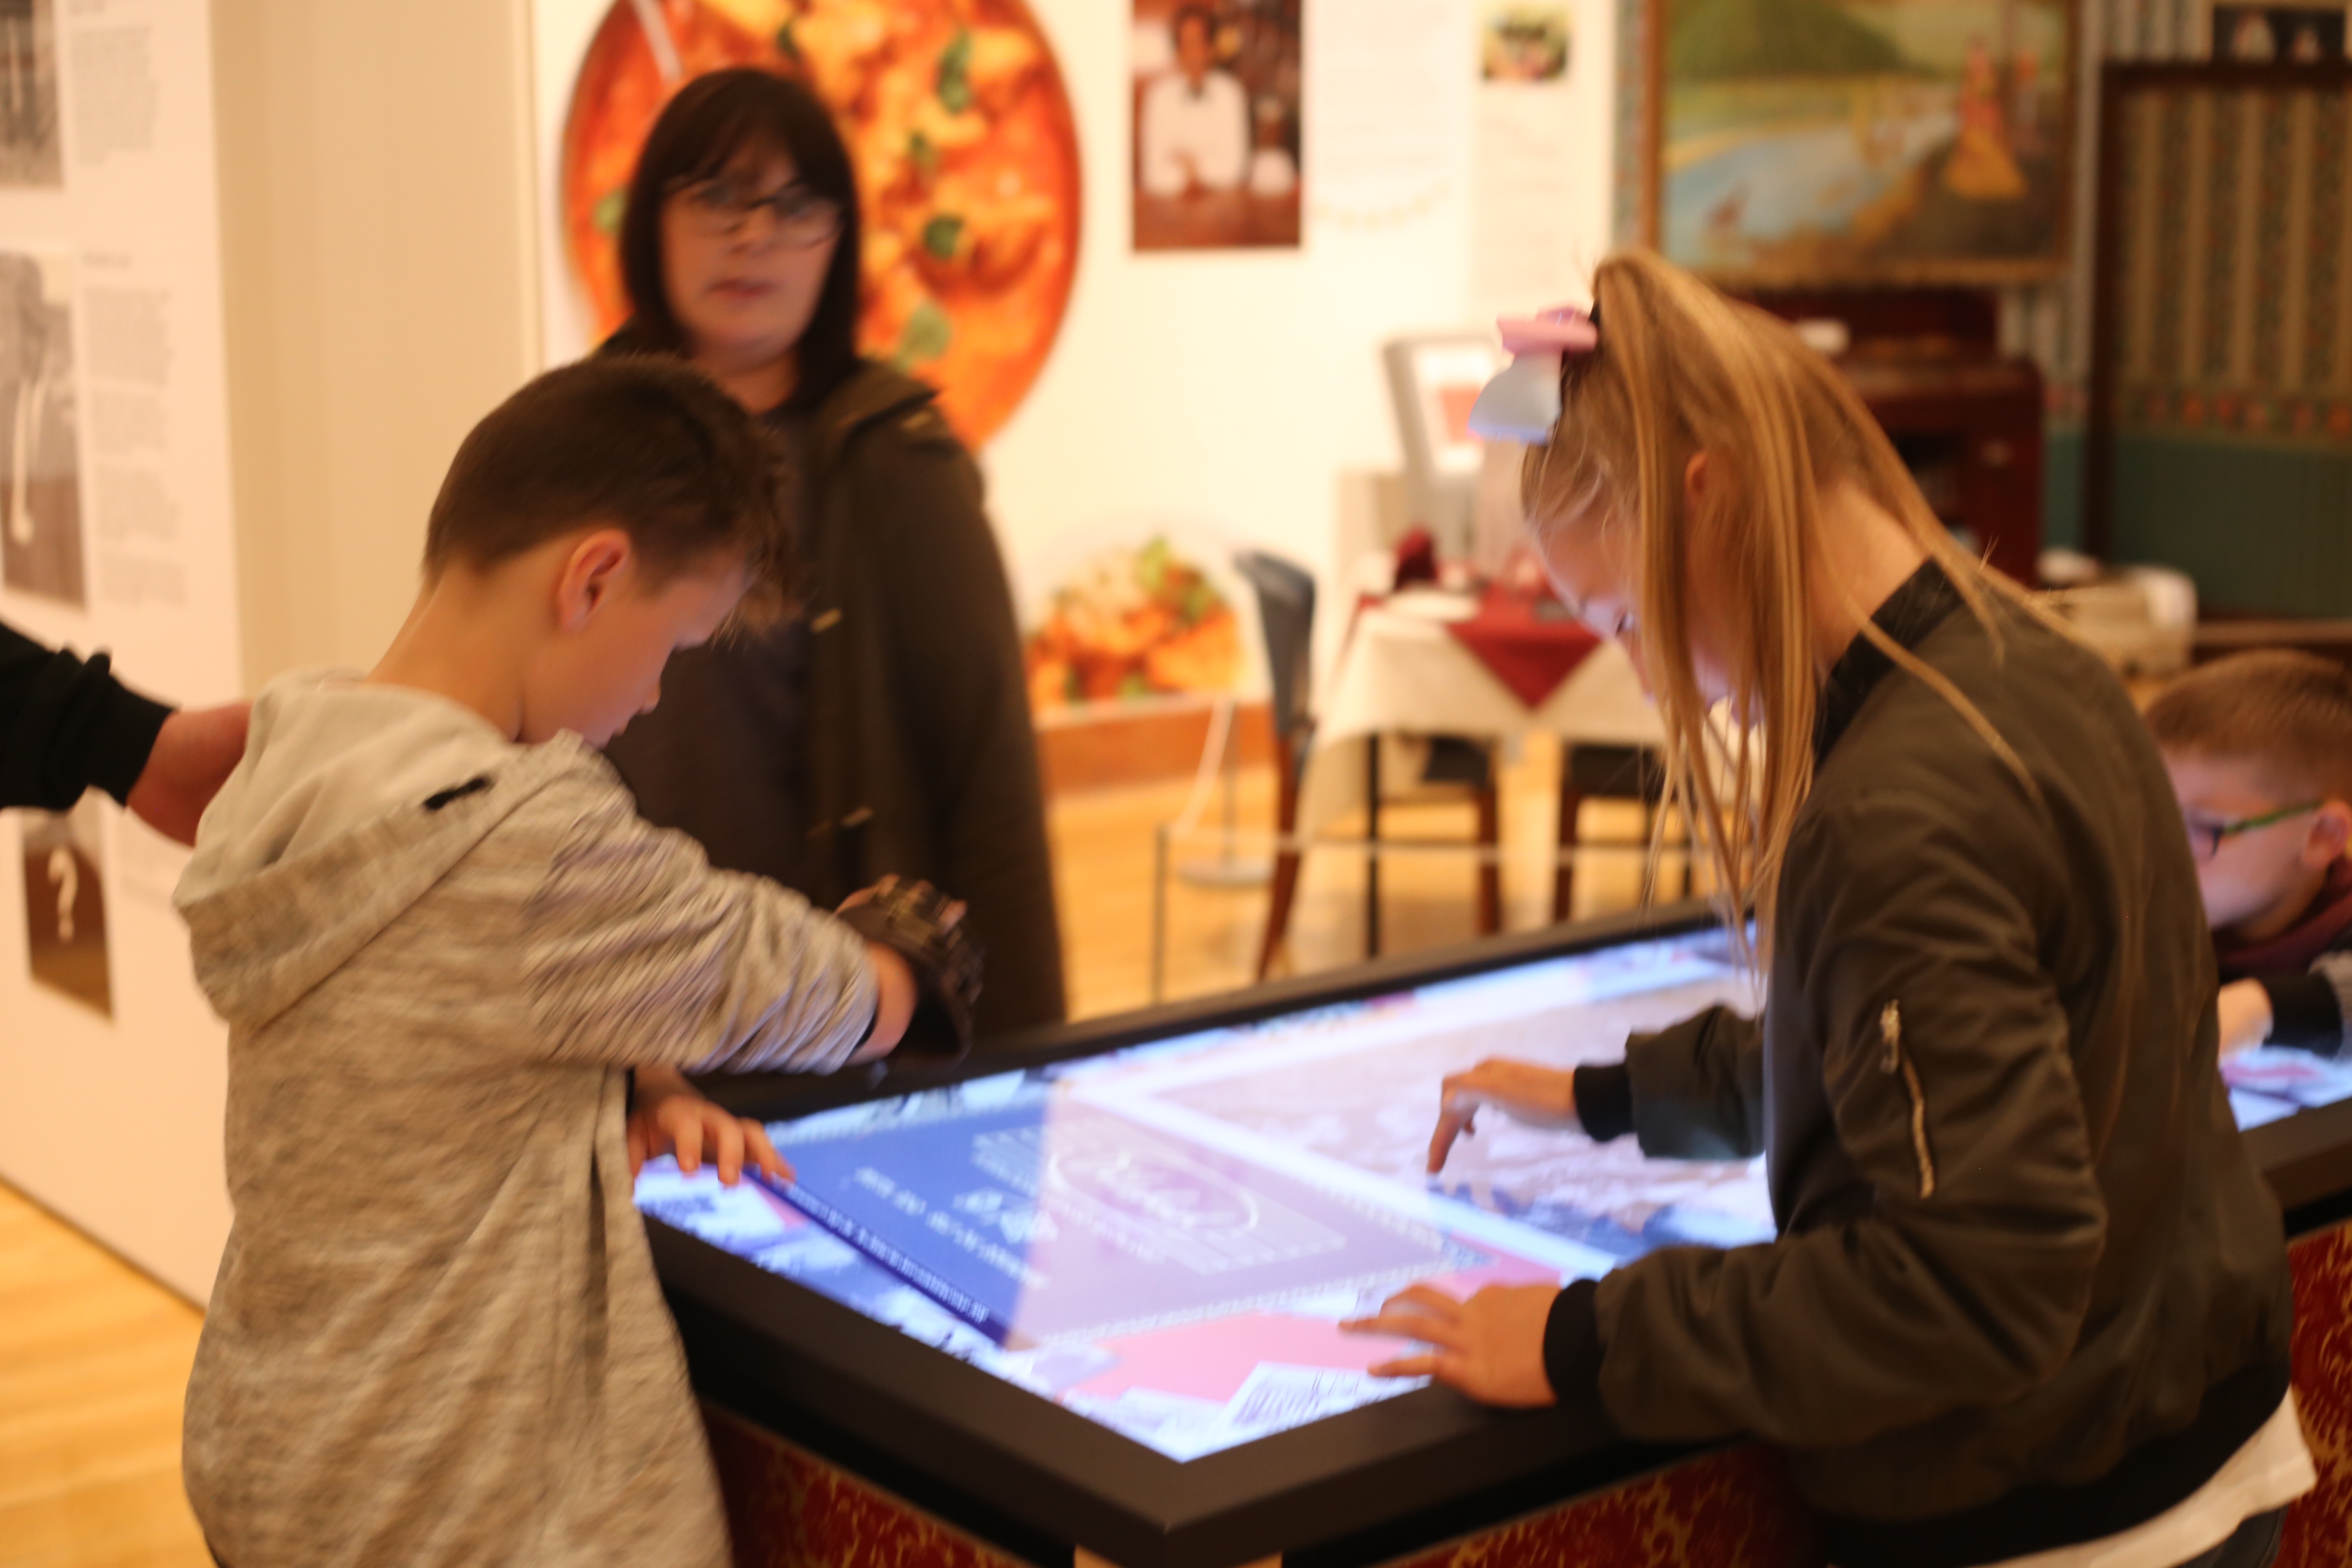 The interactive touch-table photo album was one of the many highlights at The Knights of the Raj exhibition in Birmingham